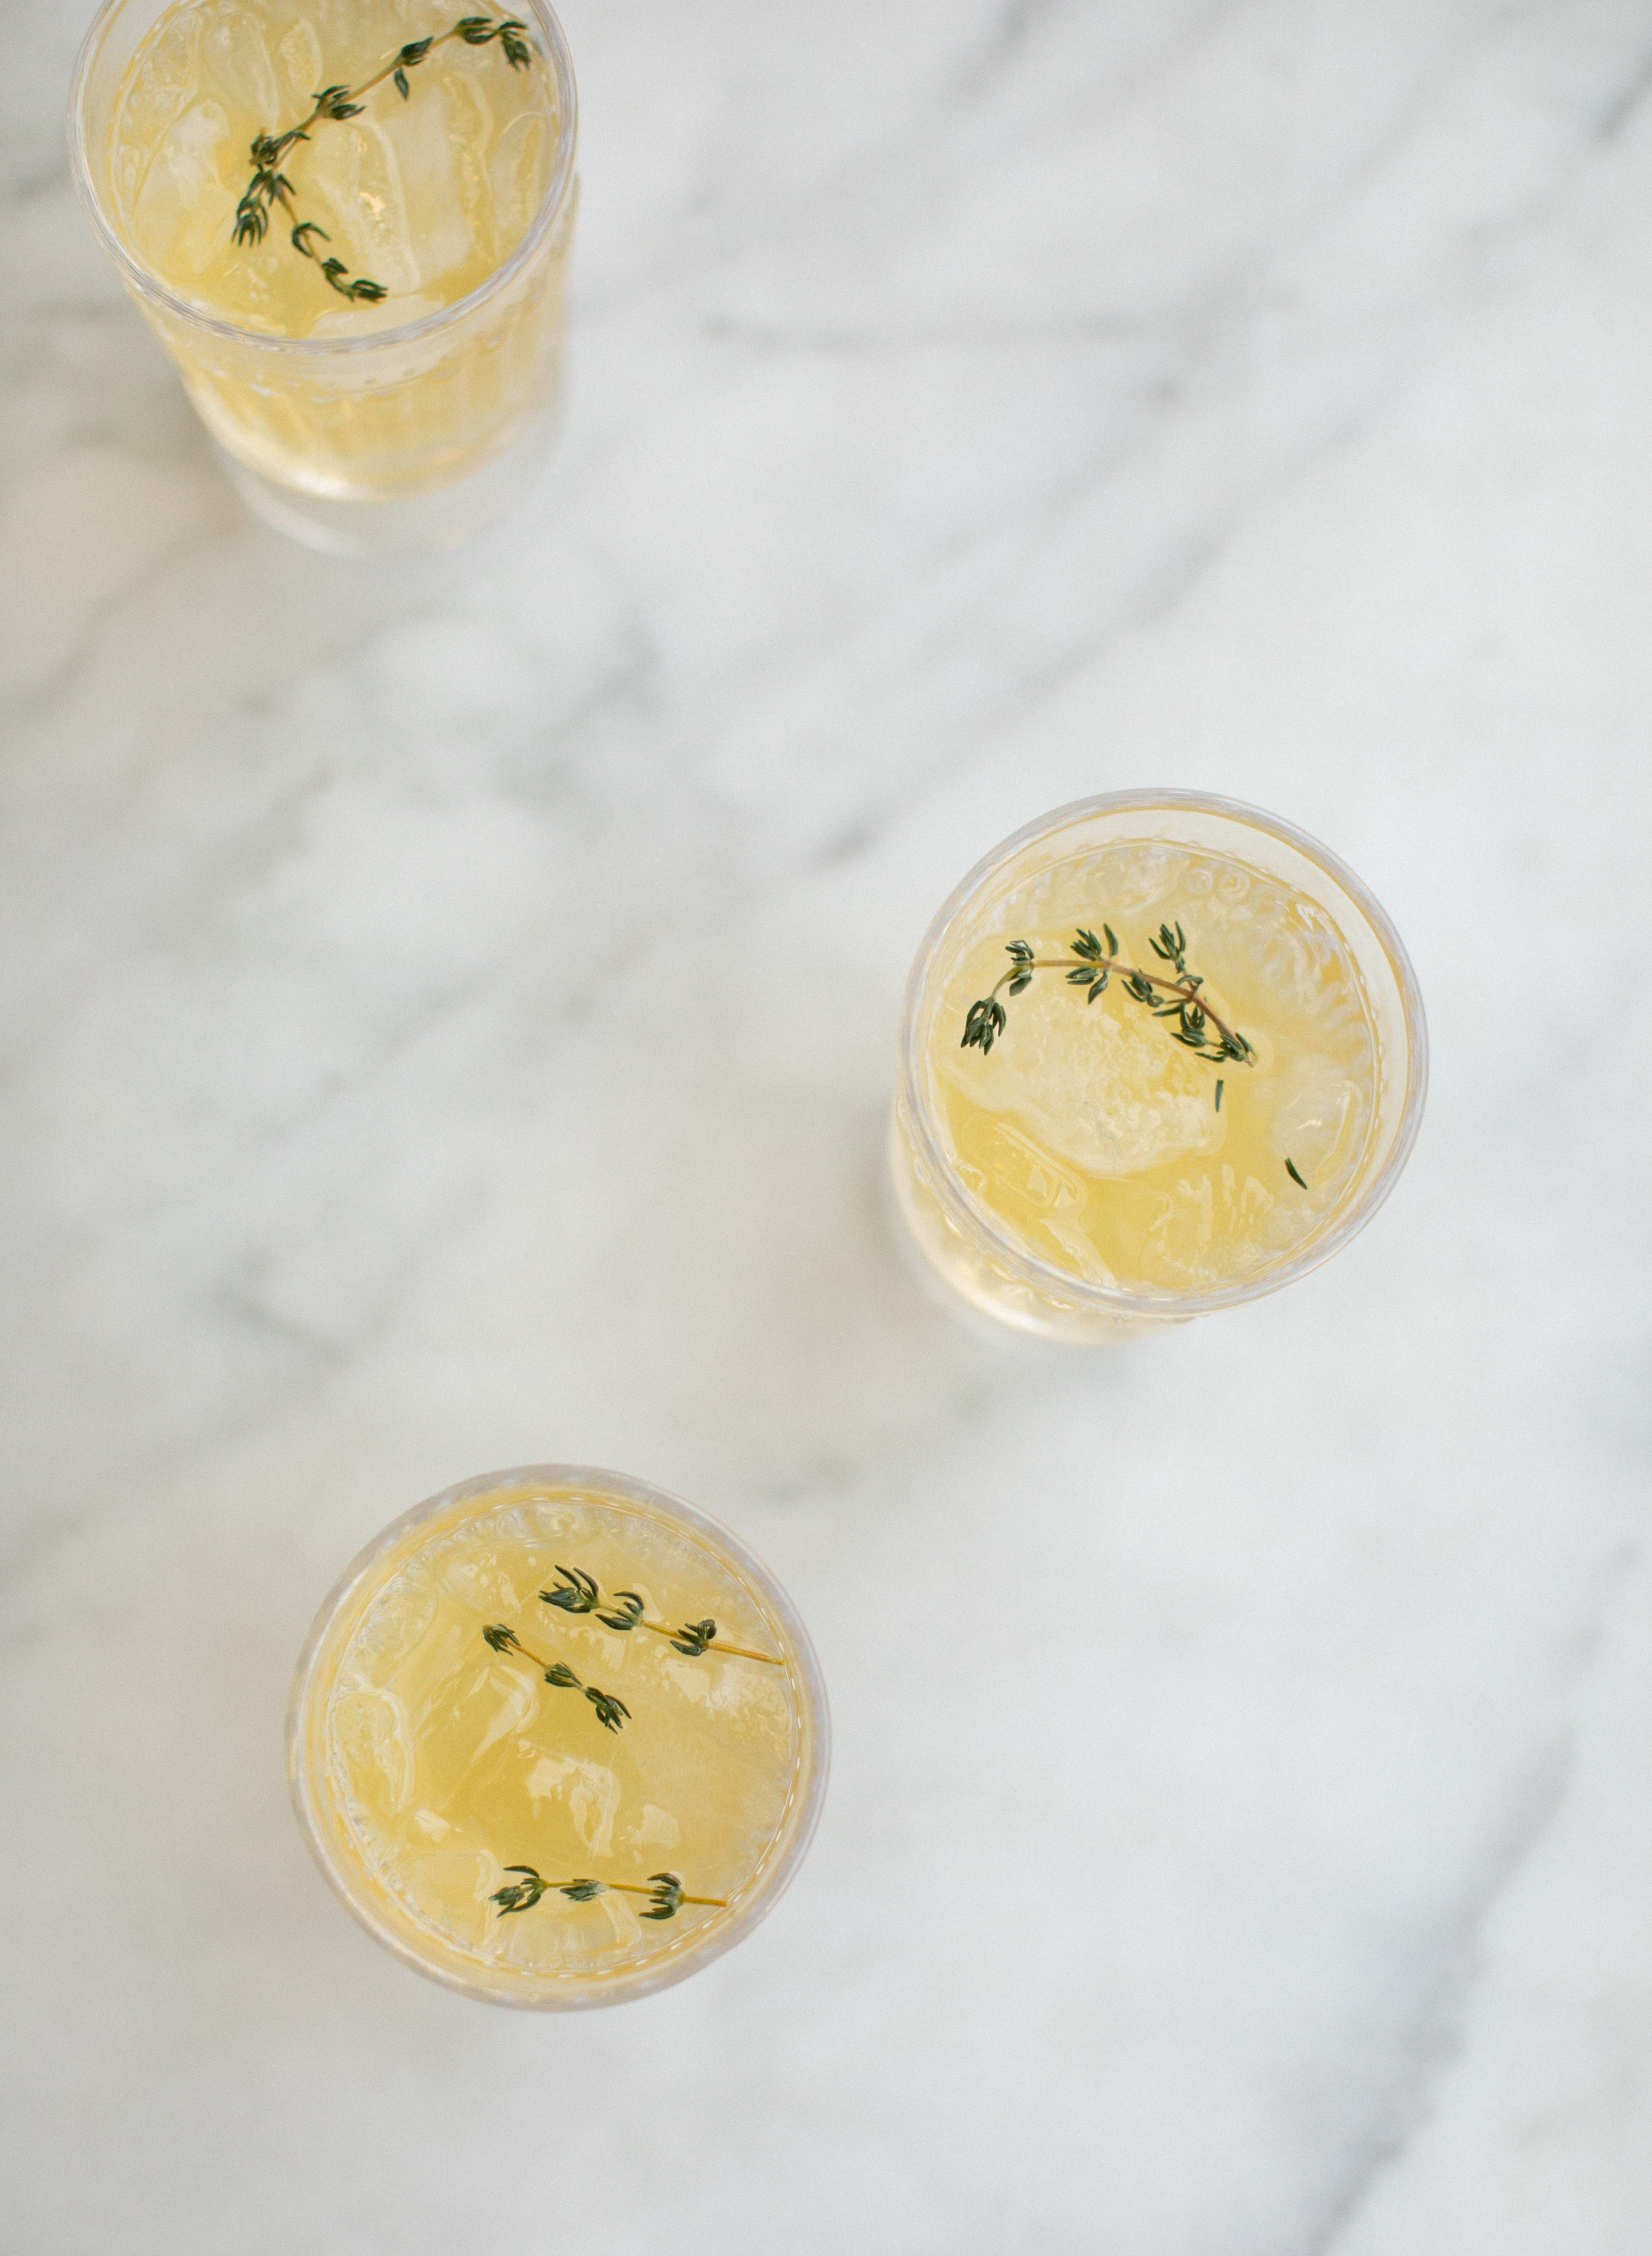 sparkling spring spritz cocktail with passionfruit and thyme